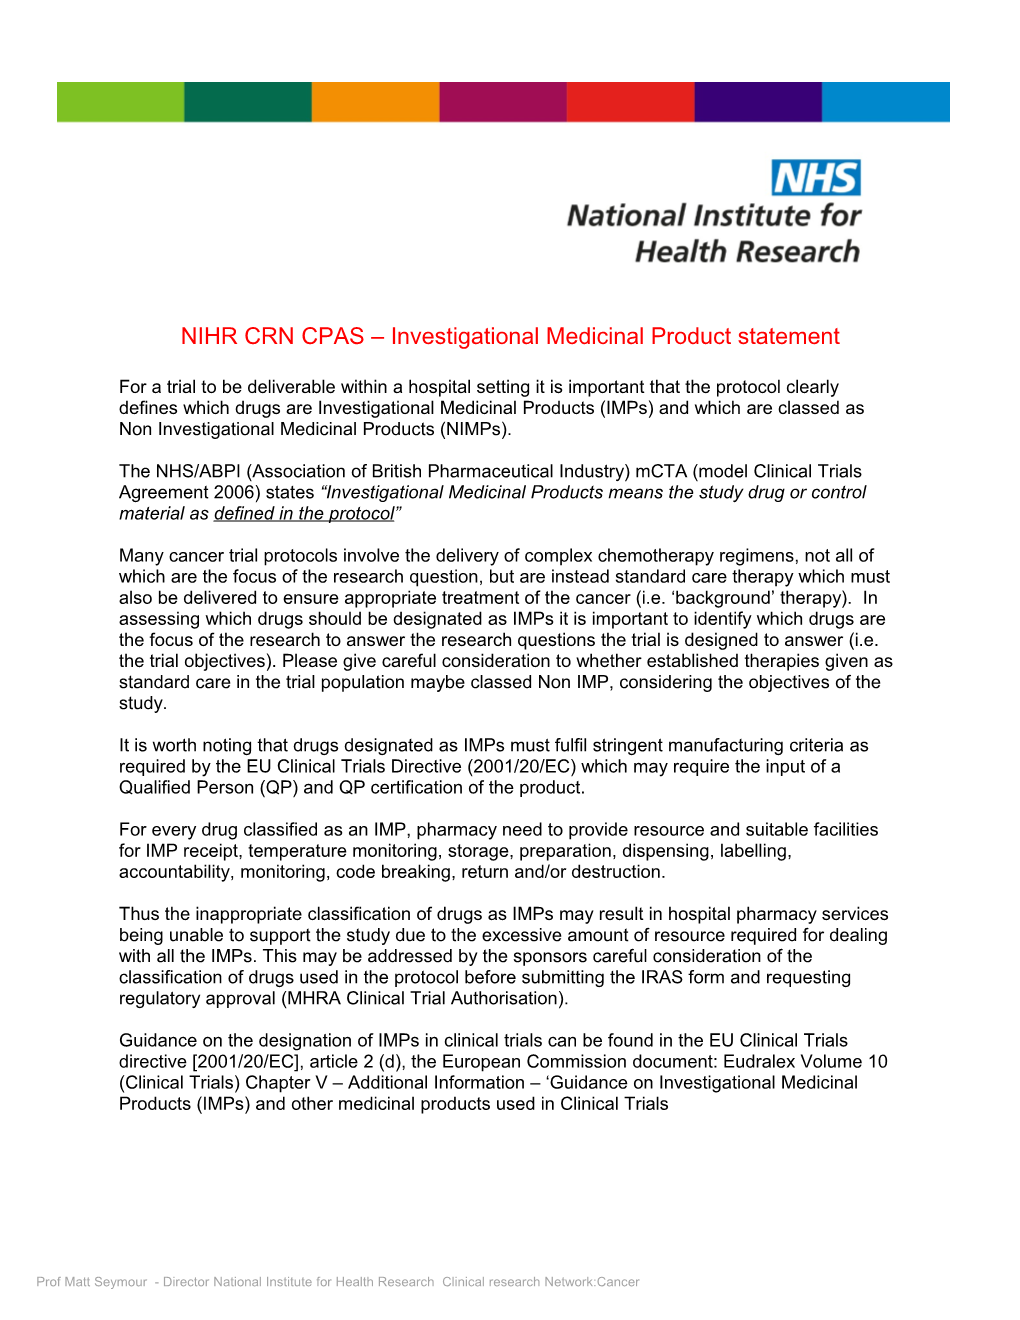 NIHR CRN CPAS Investigational Medicinal Product Statement